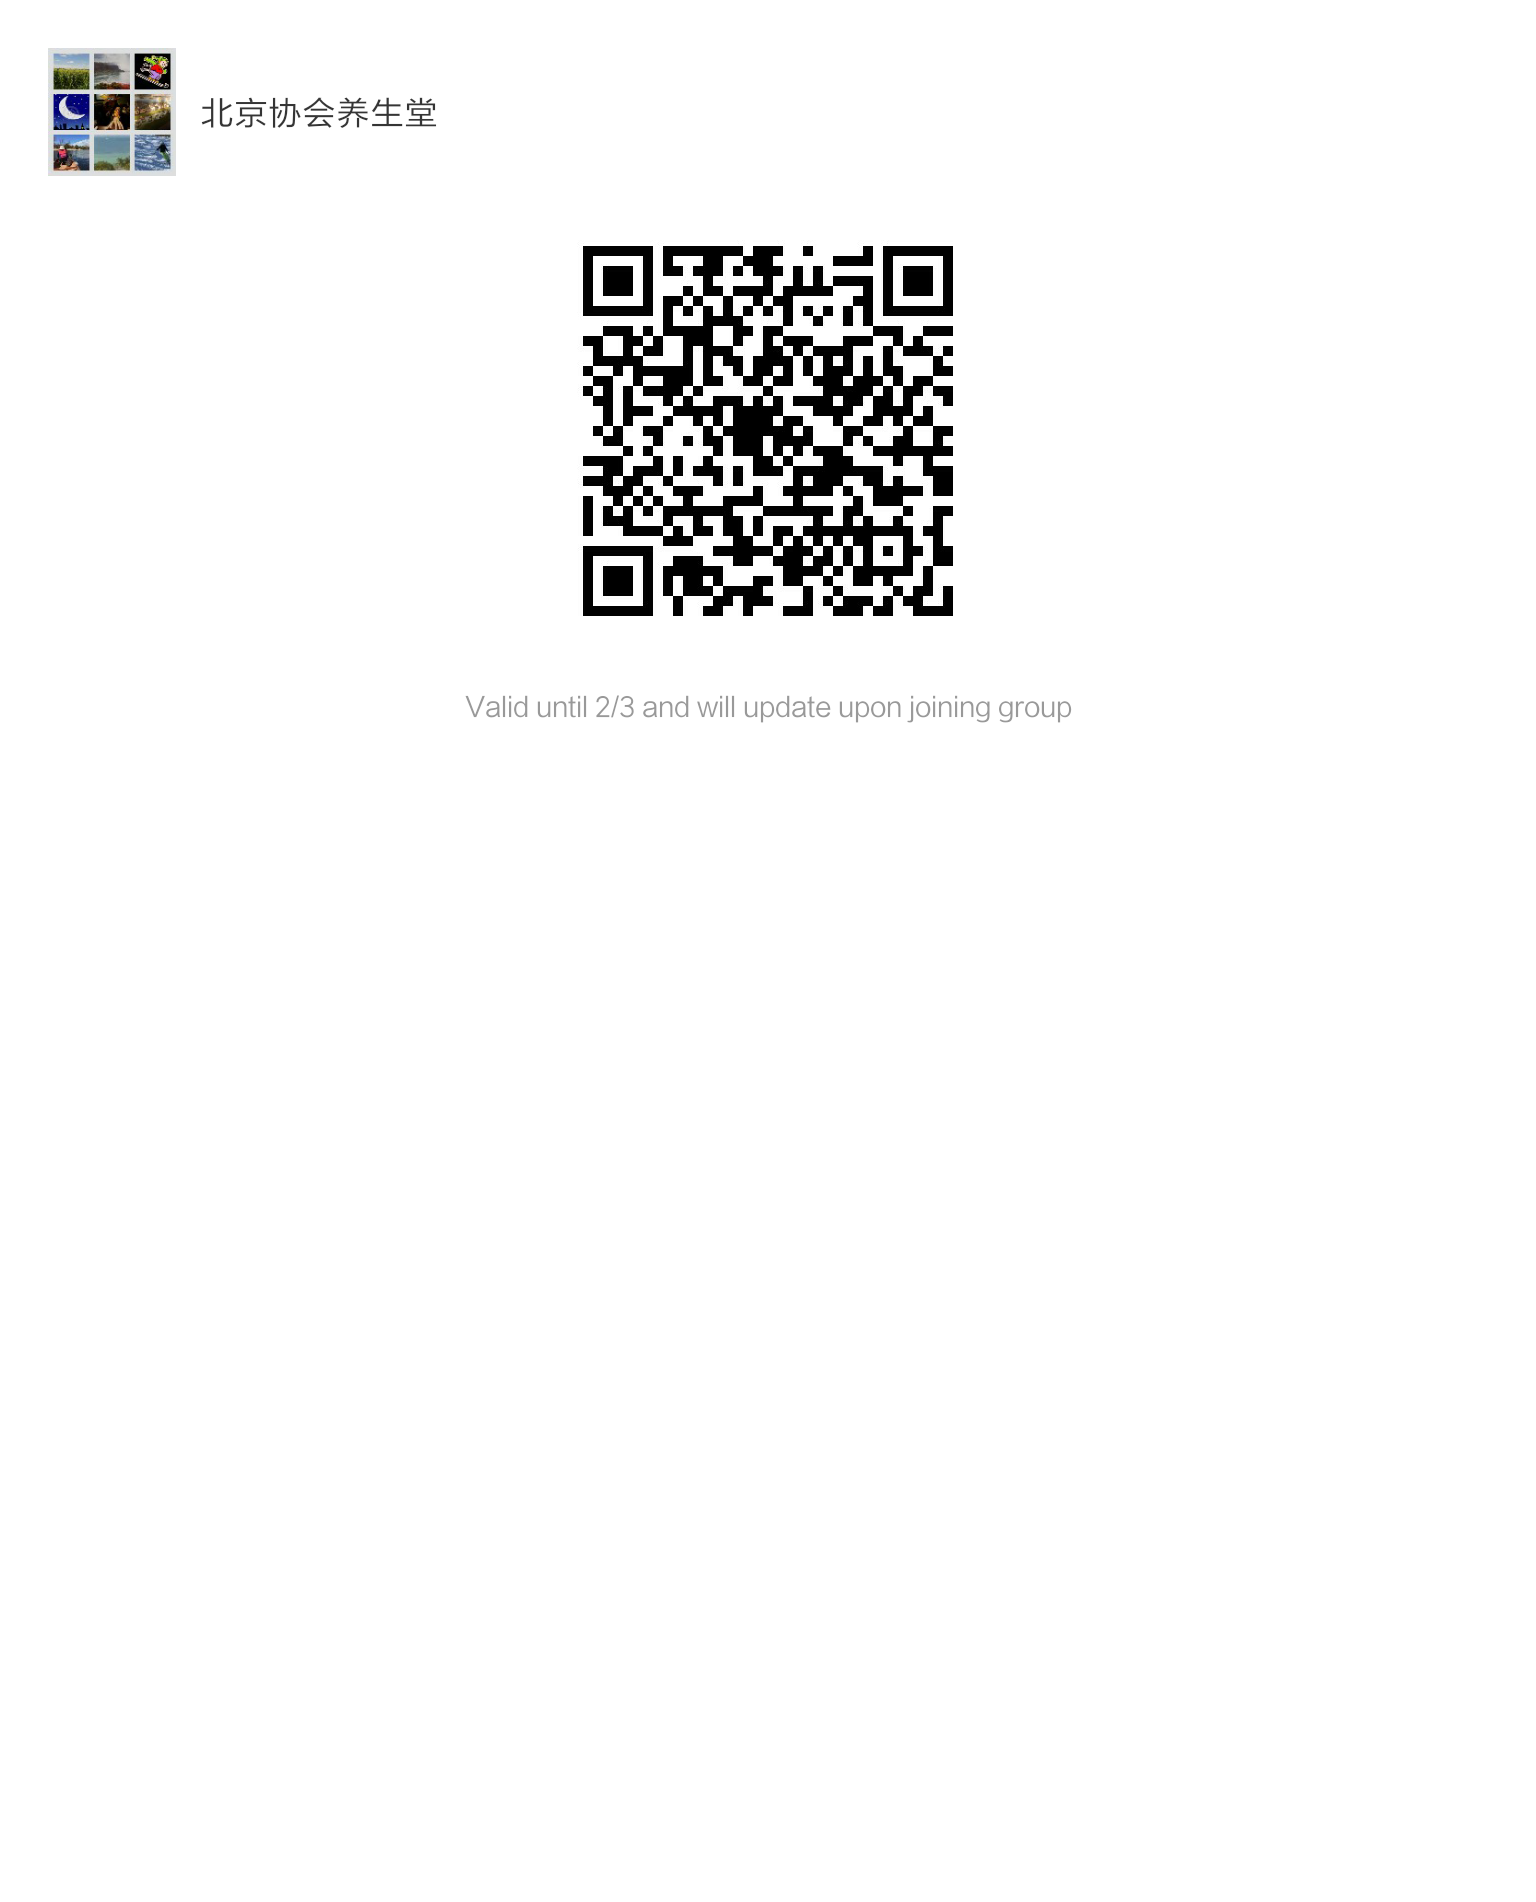 mmqrcode1485569676999.png